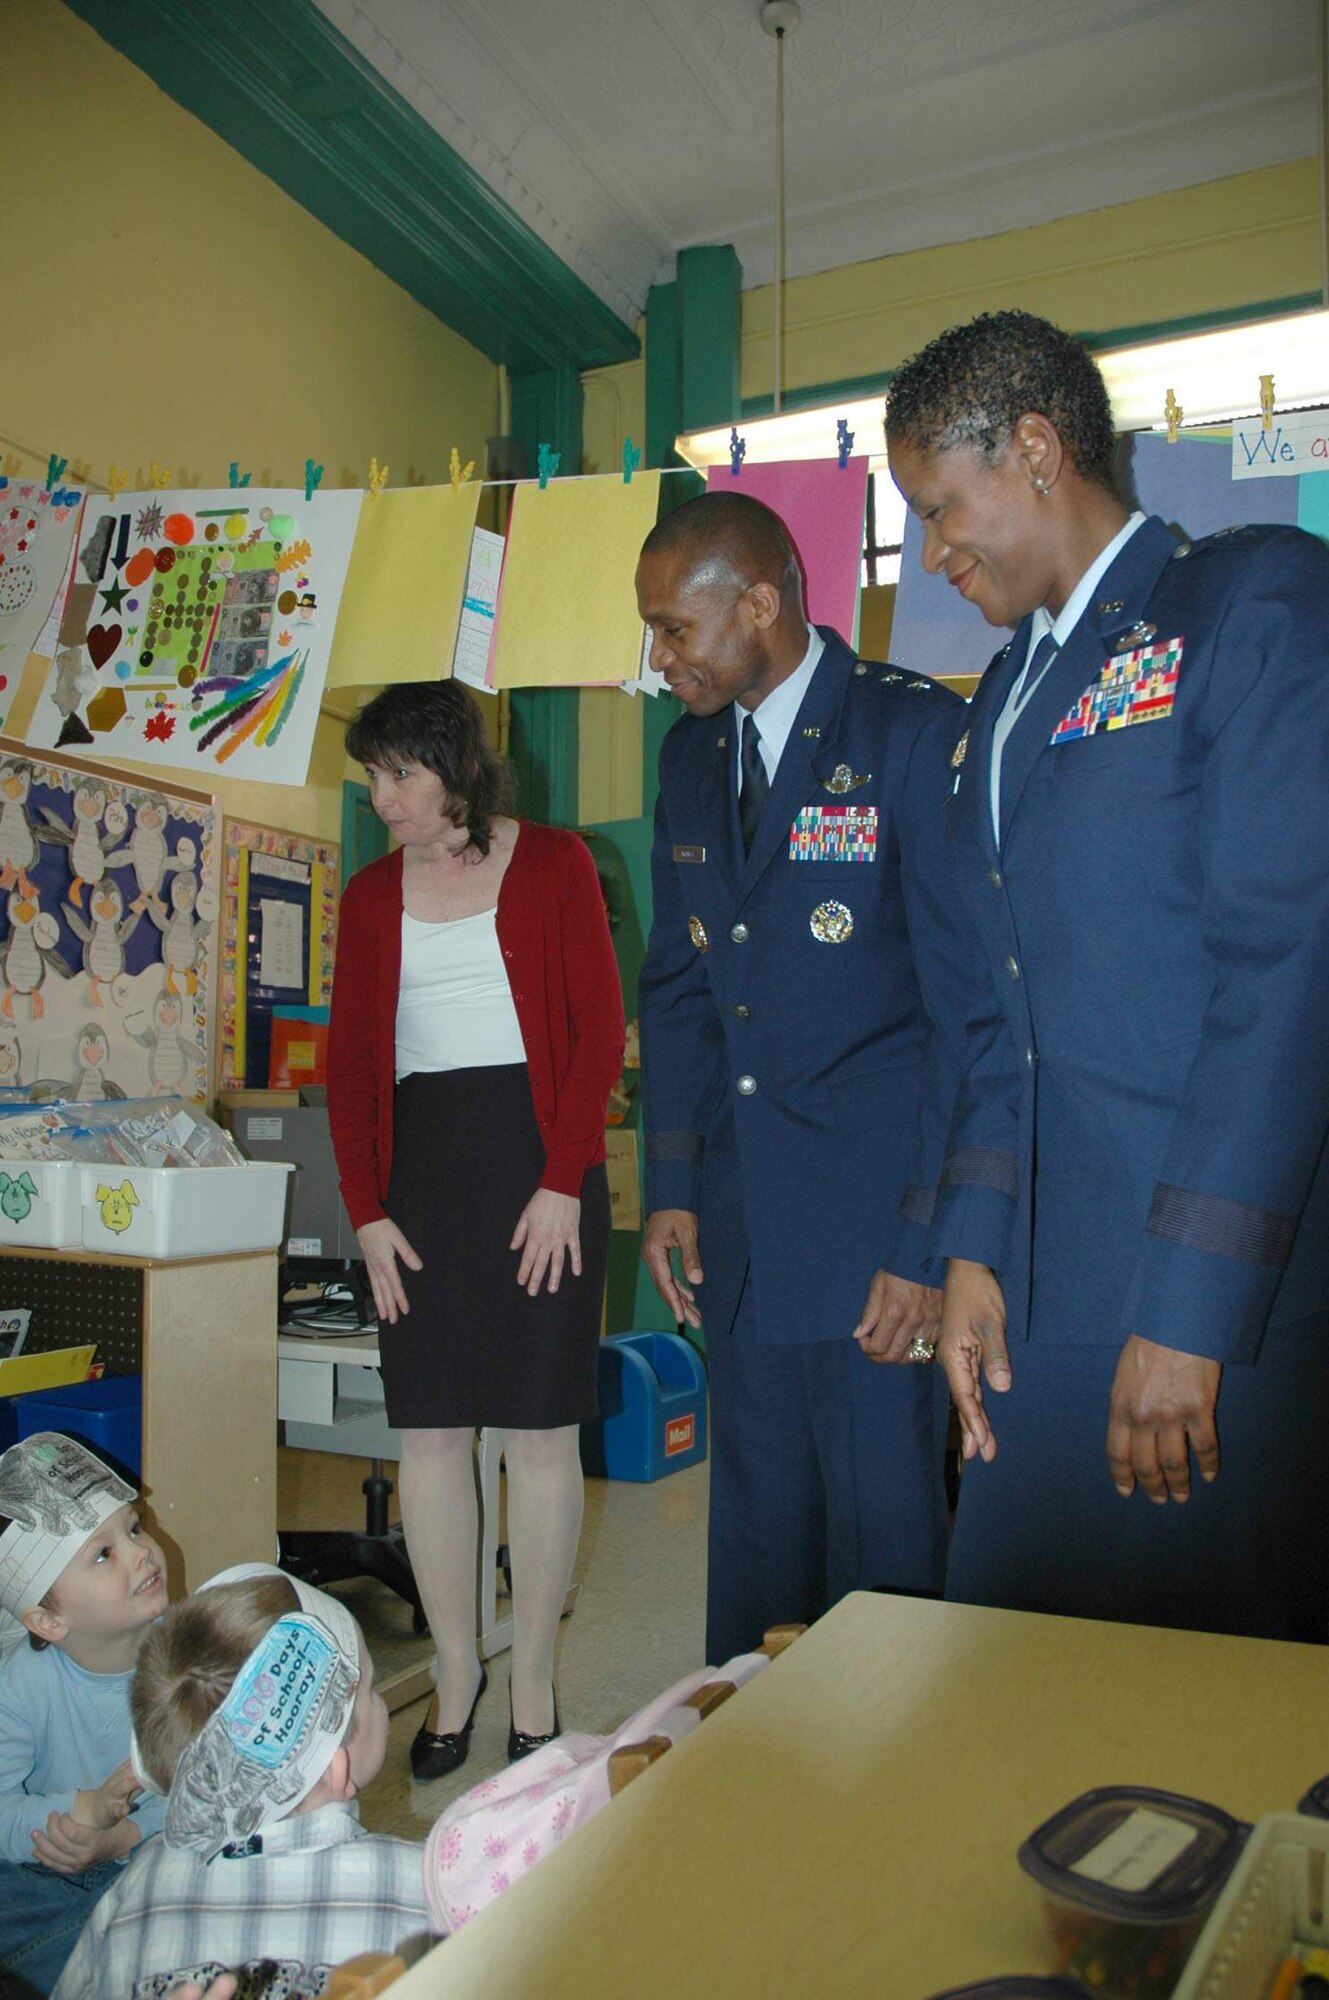 Maj. Gen. Darren W. McDew and Brig. Gen. Allyson Solomon visited the students of Public School 34, Brooklyn, NY, during the school's Citizenship Day Feb. 11. Both Generals McDew and Solomon were guest speakers for the school's event, where they spoke about what exemplifies a great citizen. General McDew is the director of Public Affairs, Office of the Secretary of the Air Force. General Solomon is the assistant adjutant general for the Maryland Air National Guard and special assistant to the National Guard Bureau chief. (U.S. Air Force photo/Capt. Geoff Buteau) 
